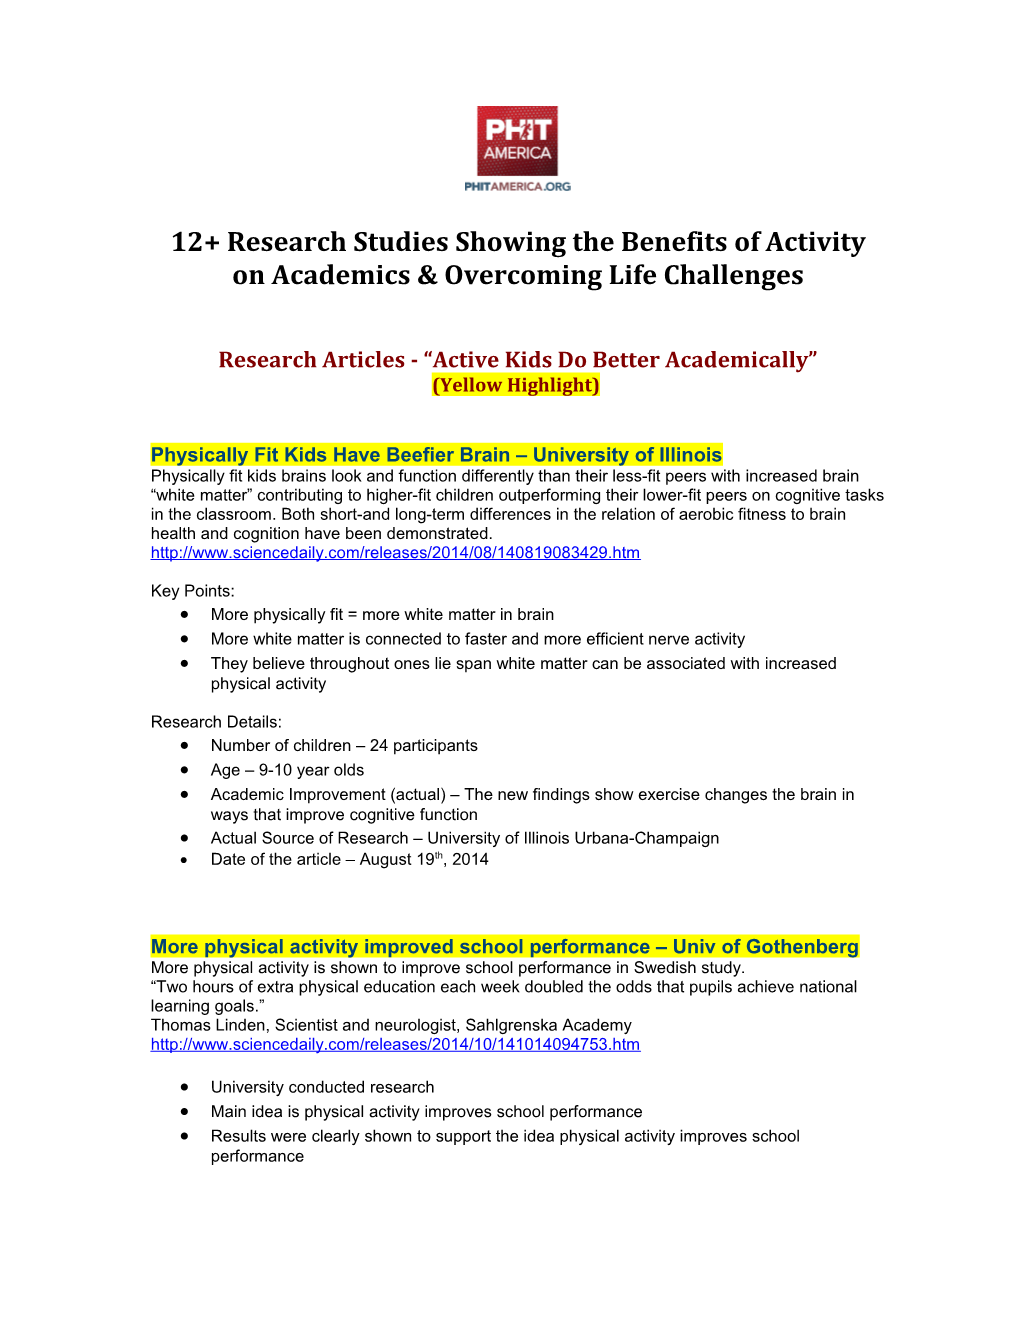 12+ Research Studies Showing the Benefits of Activity on Academics & Overcoming Life Challenges